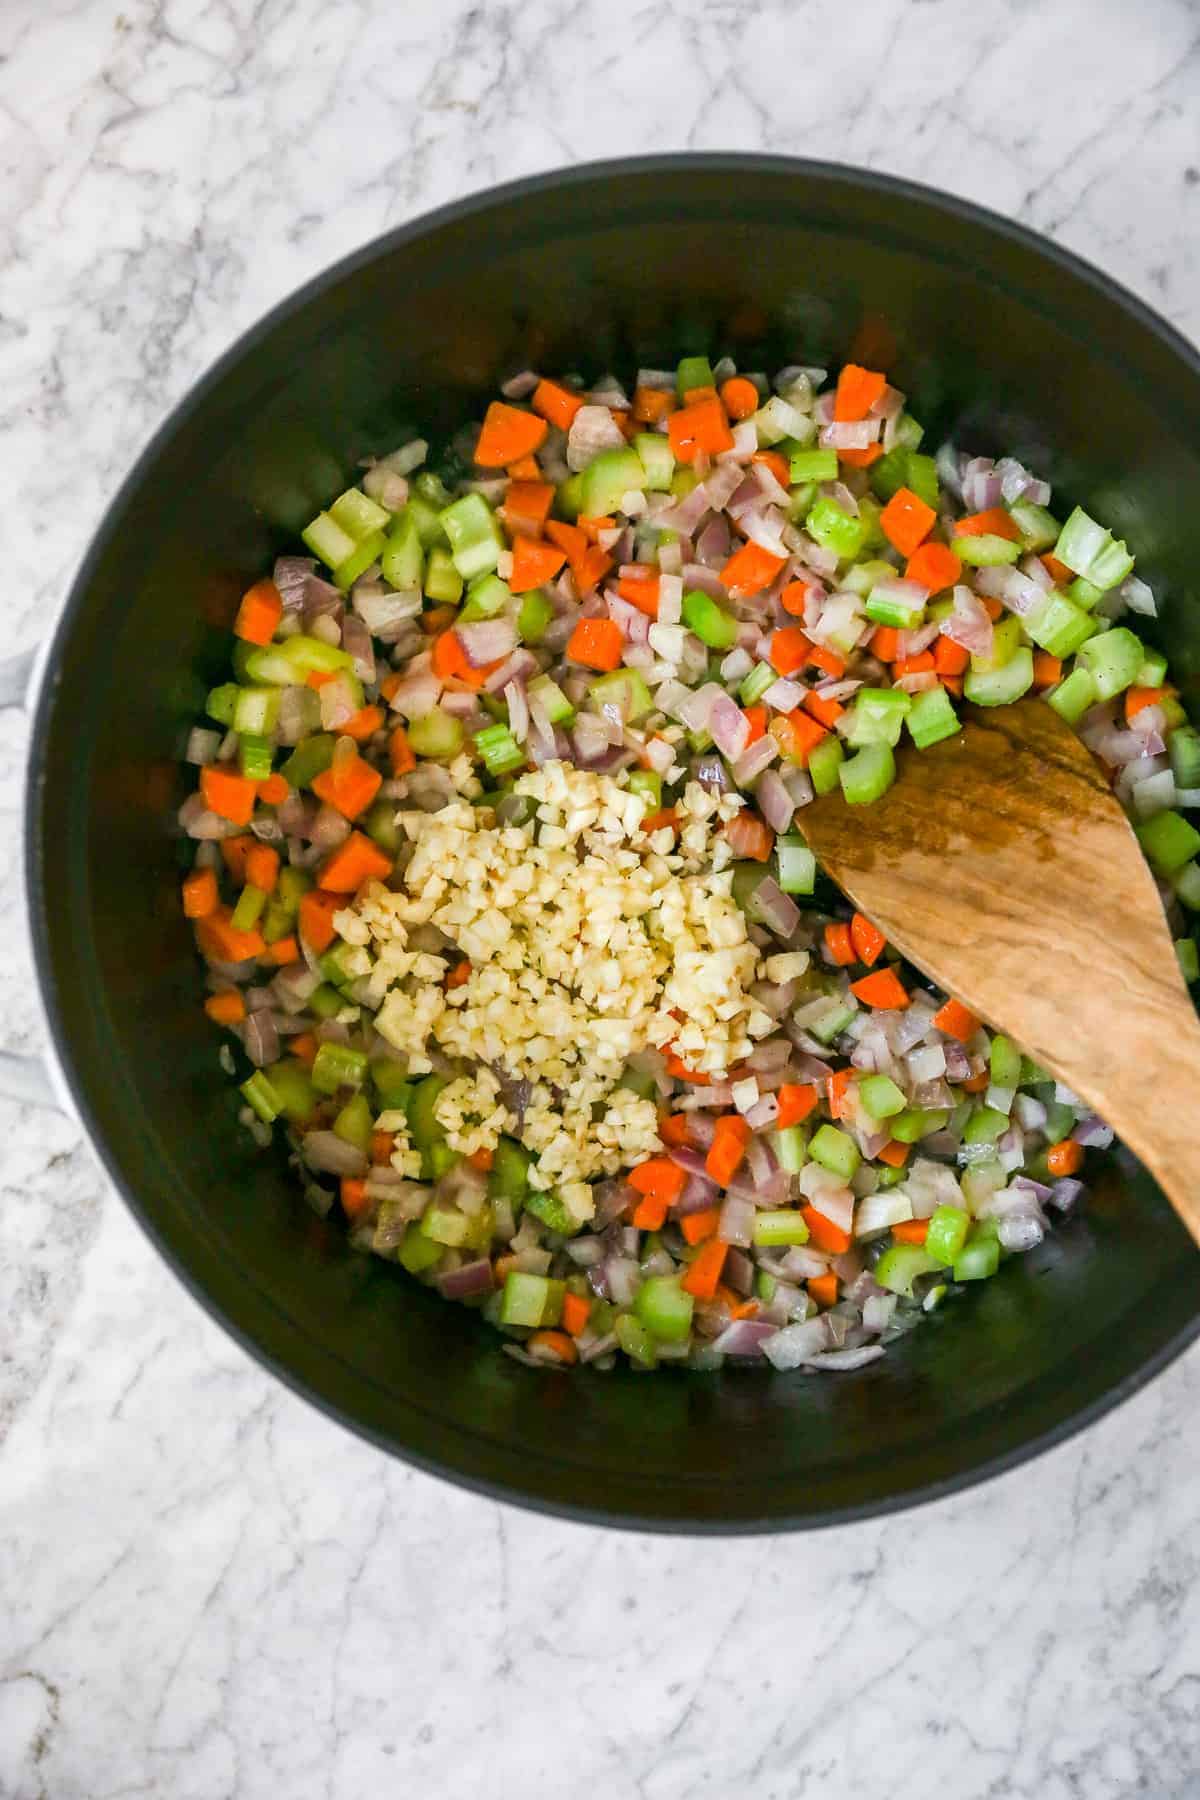 sautéing the mirepoix and adding in garlic